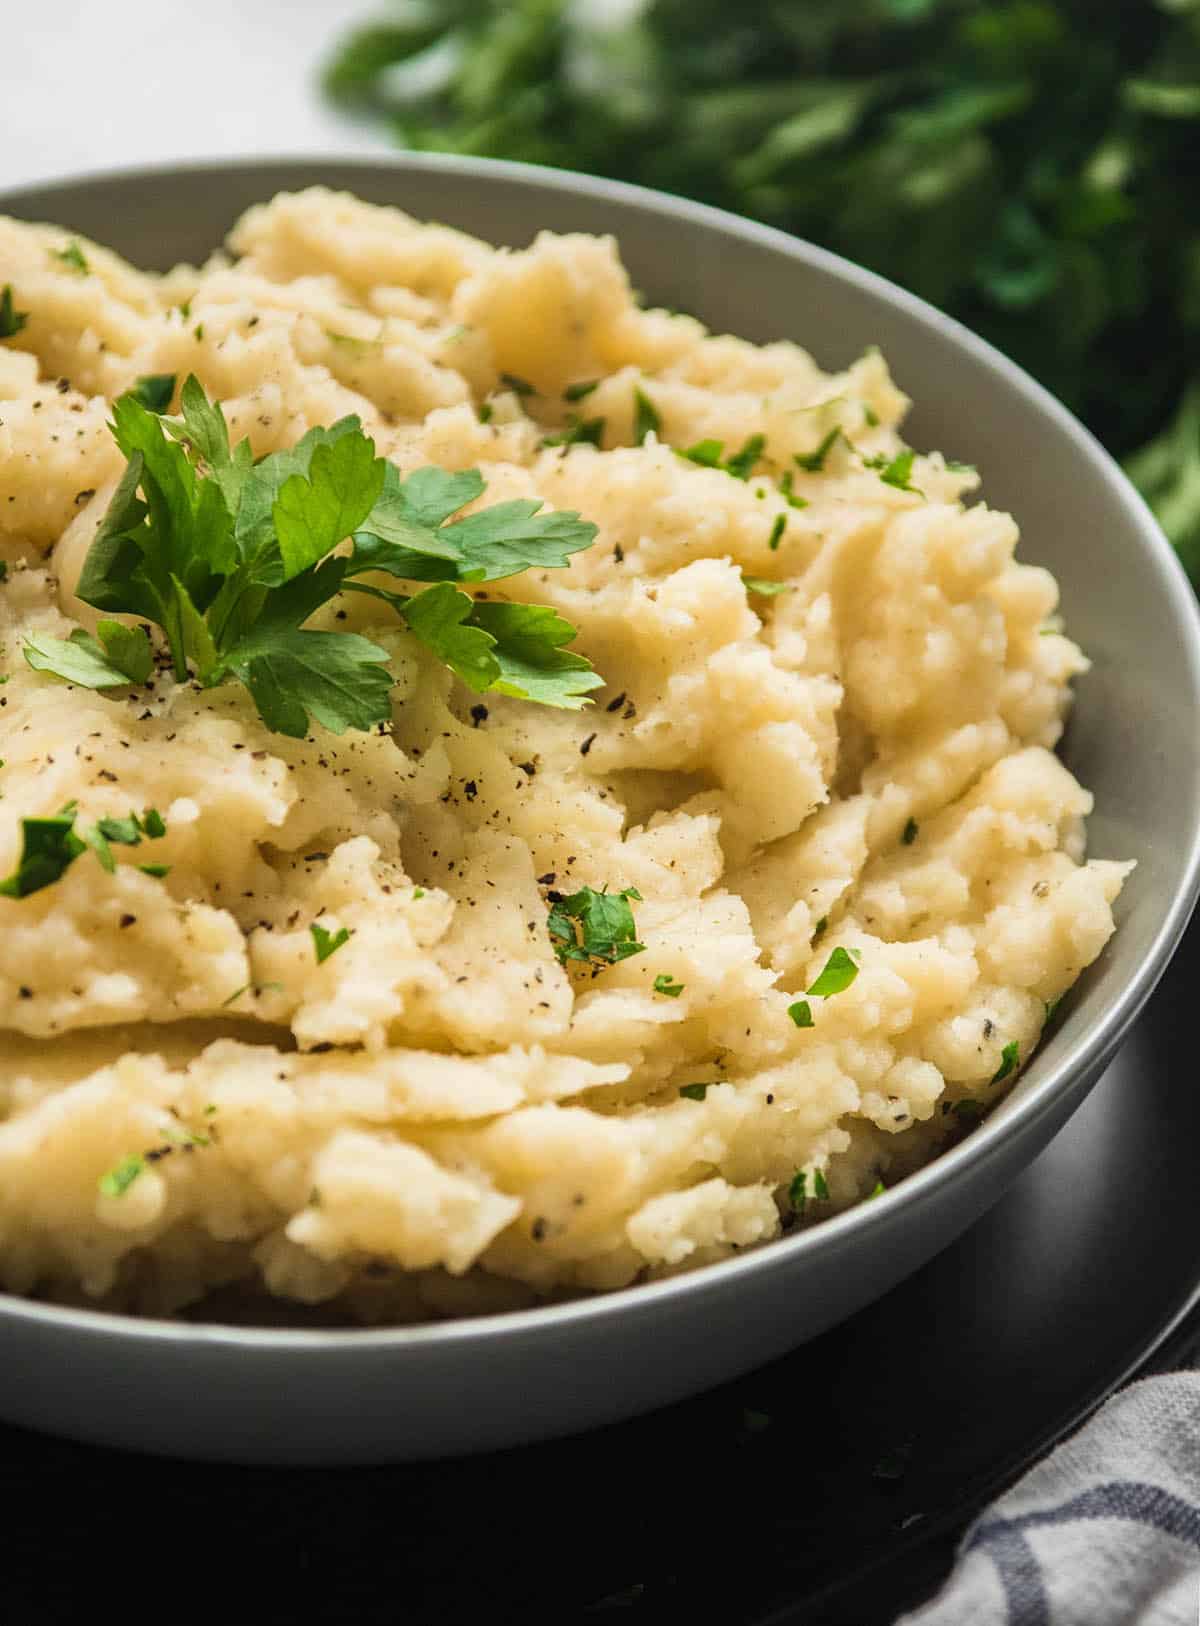 Mashed potatoes topped with parsley and black pepper.